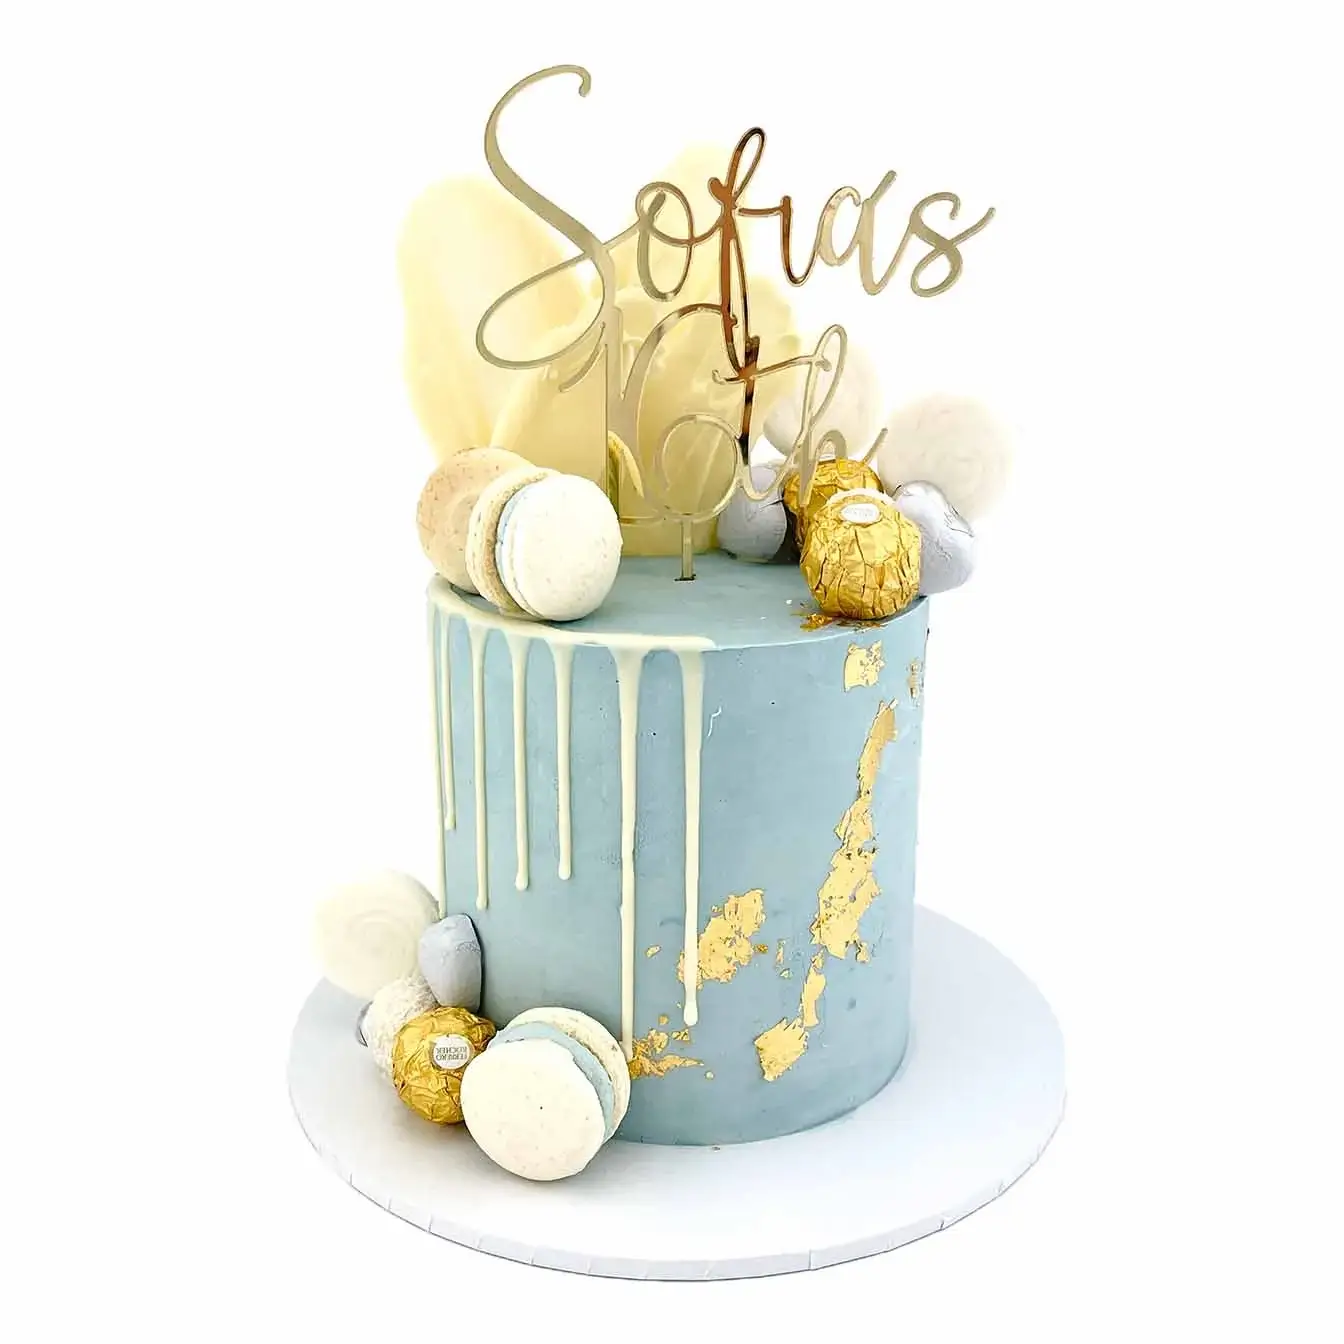  Luxe Drip Cake - A mesmerizing blue and white drip cake with gold leafing, Ferrero Rochers, chocolate sails, macarons, assorted chocolates, and a gold custom cake topper, an opulent centerpiece for indulgent celebrations.